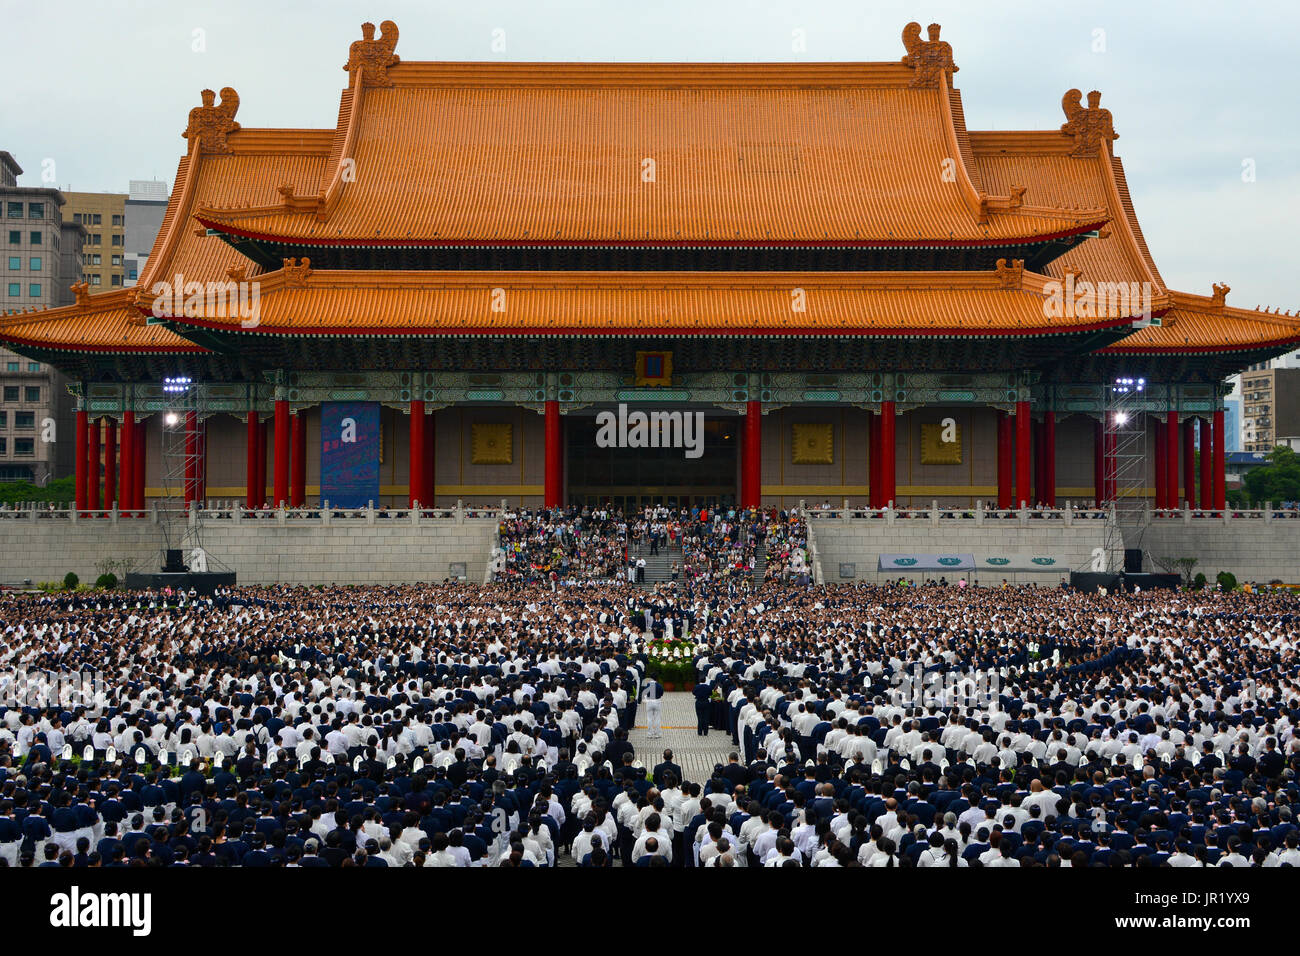 TAIPEI, TAIWAN - MAY 14, 2017 - Members of the Buddhist Tzu Chi Foundation gather to celebrate an annual event at Chiang Kai-shek Memorial in Taipei Stock Photo